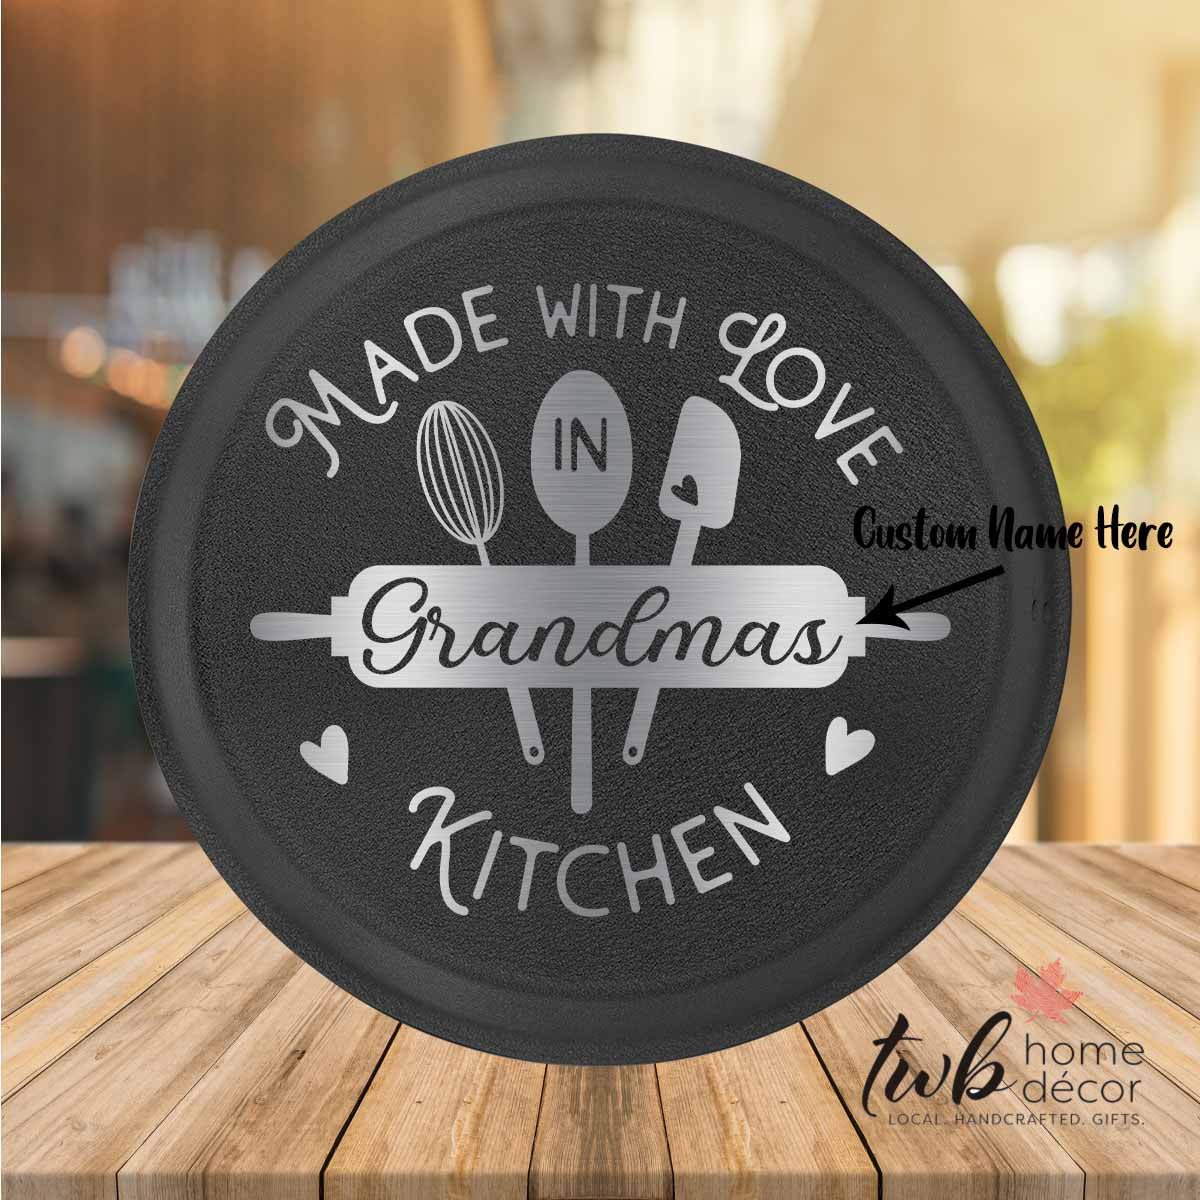 Made With Love In... Kitchen Pie Pan - CUSTOM